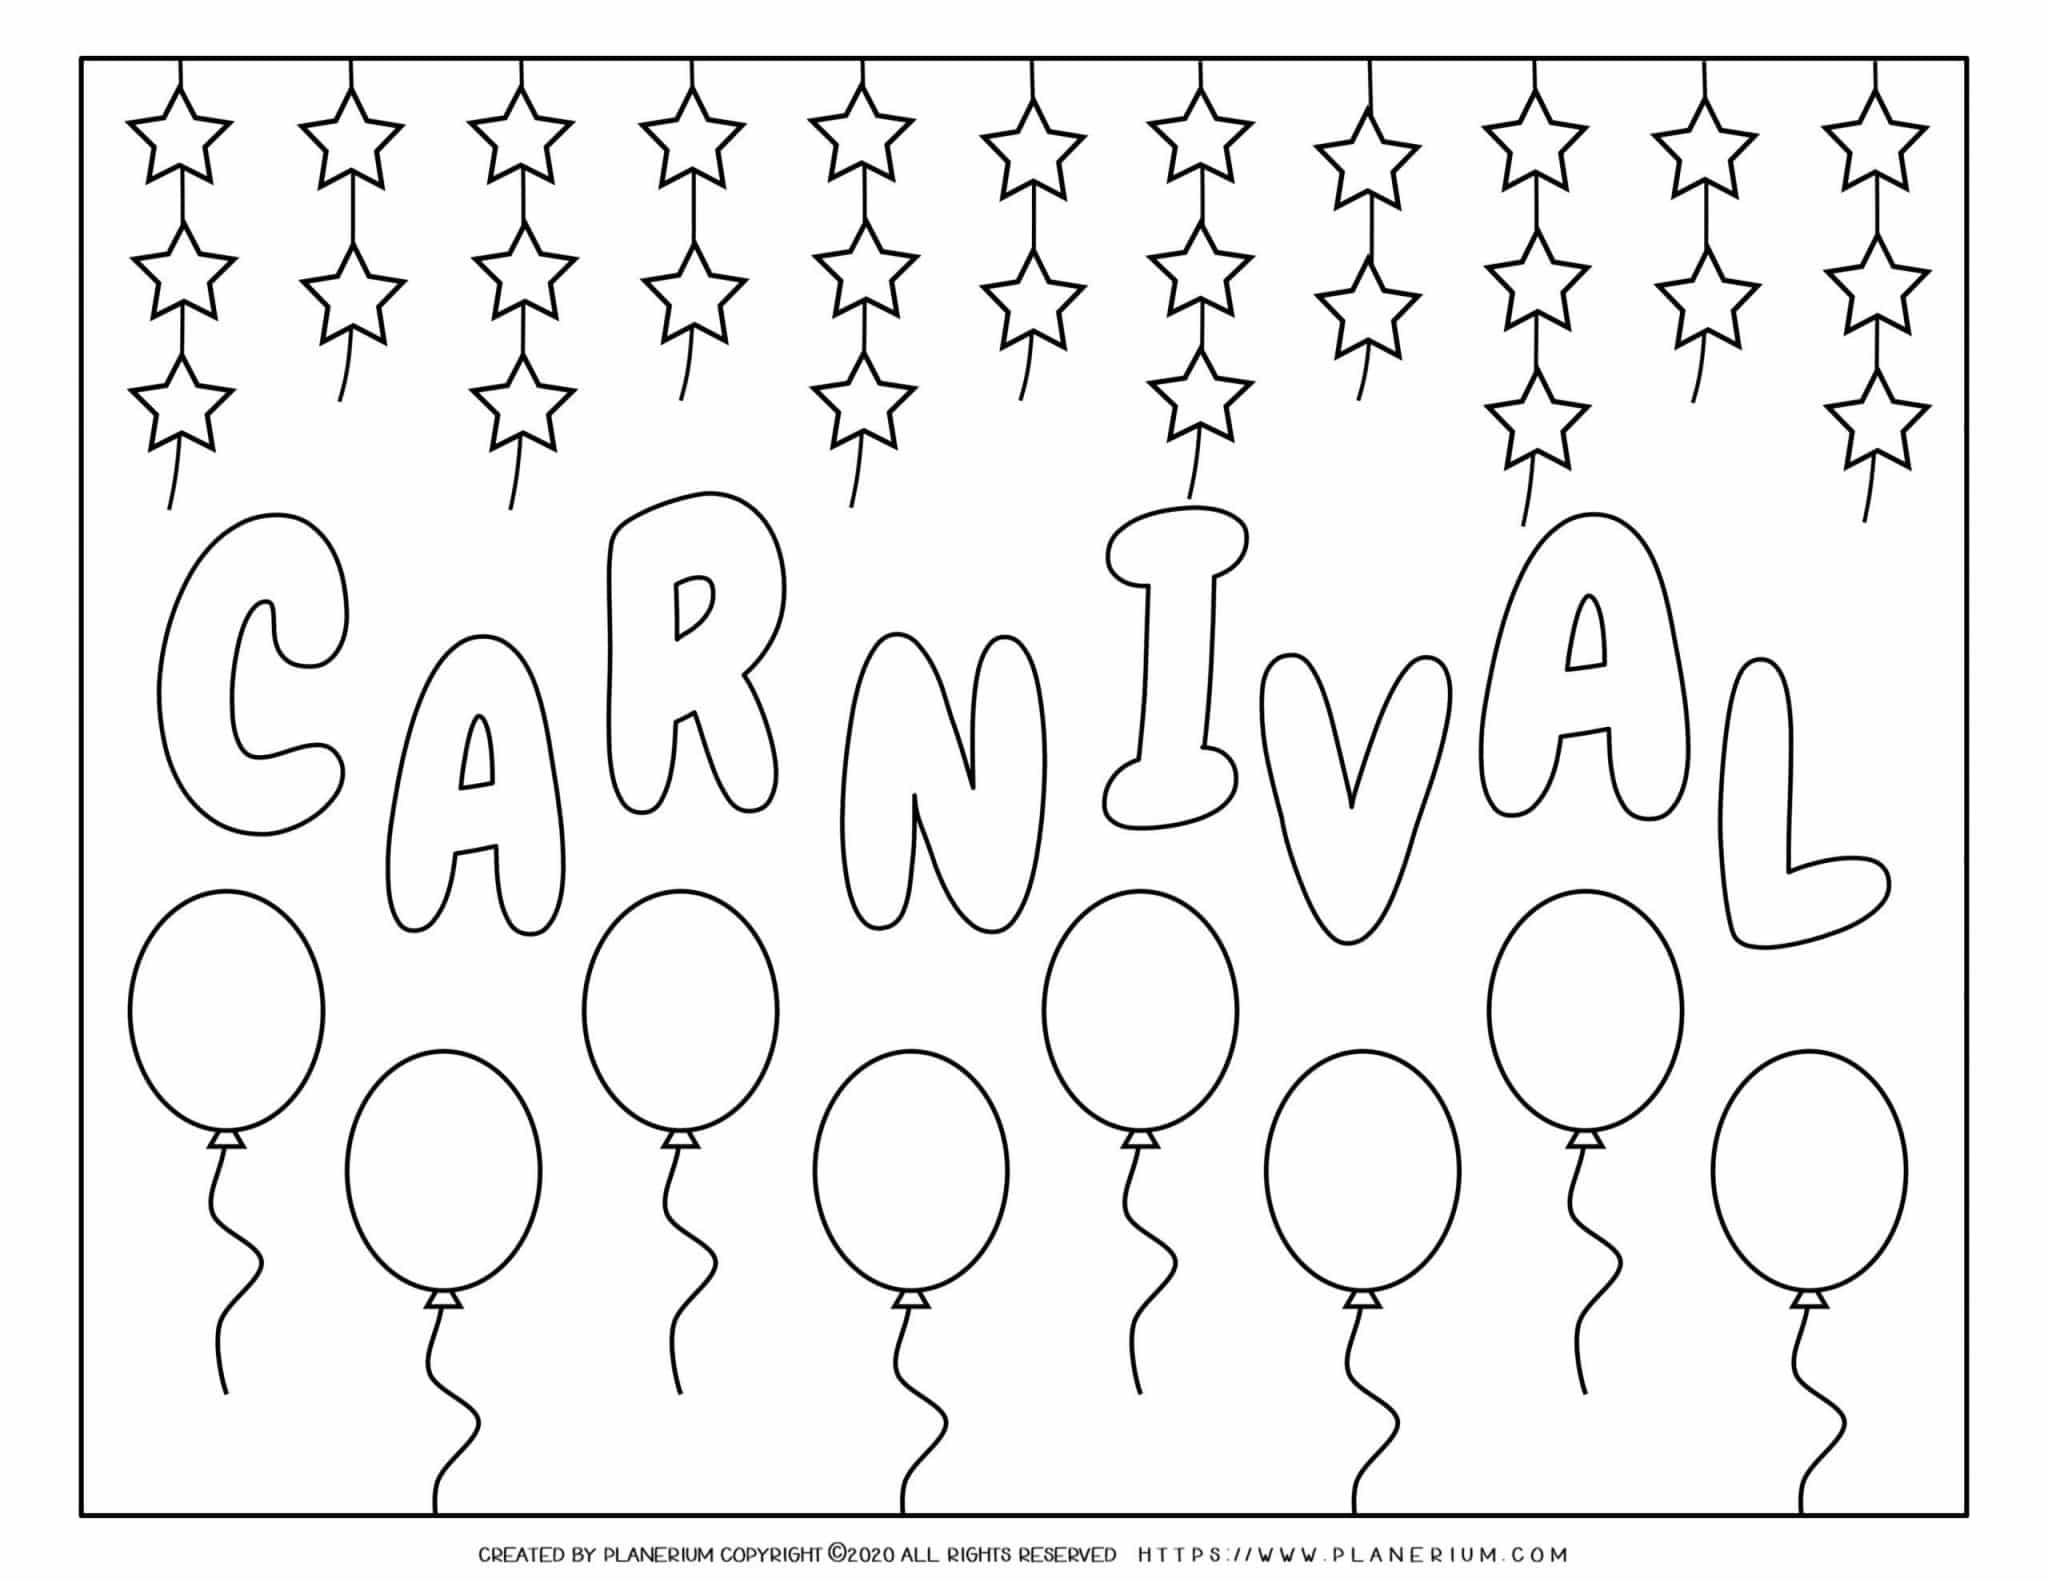 carnival-coloring-page-party-poster-free-printable-planerium